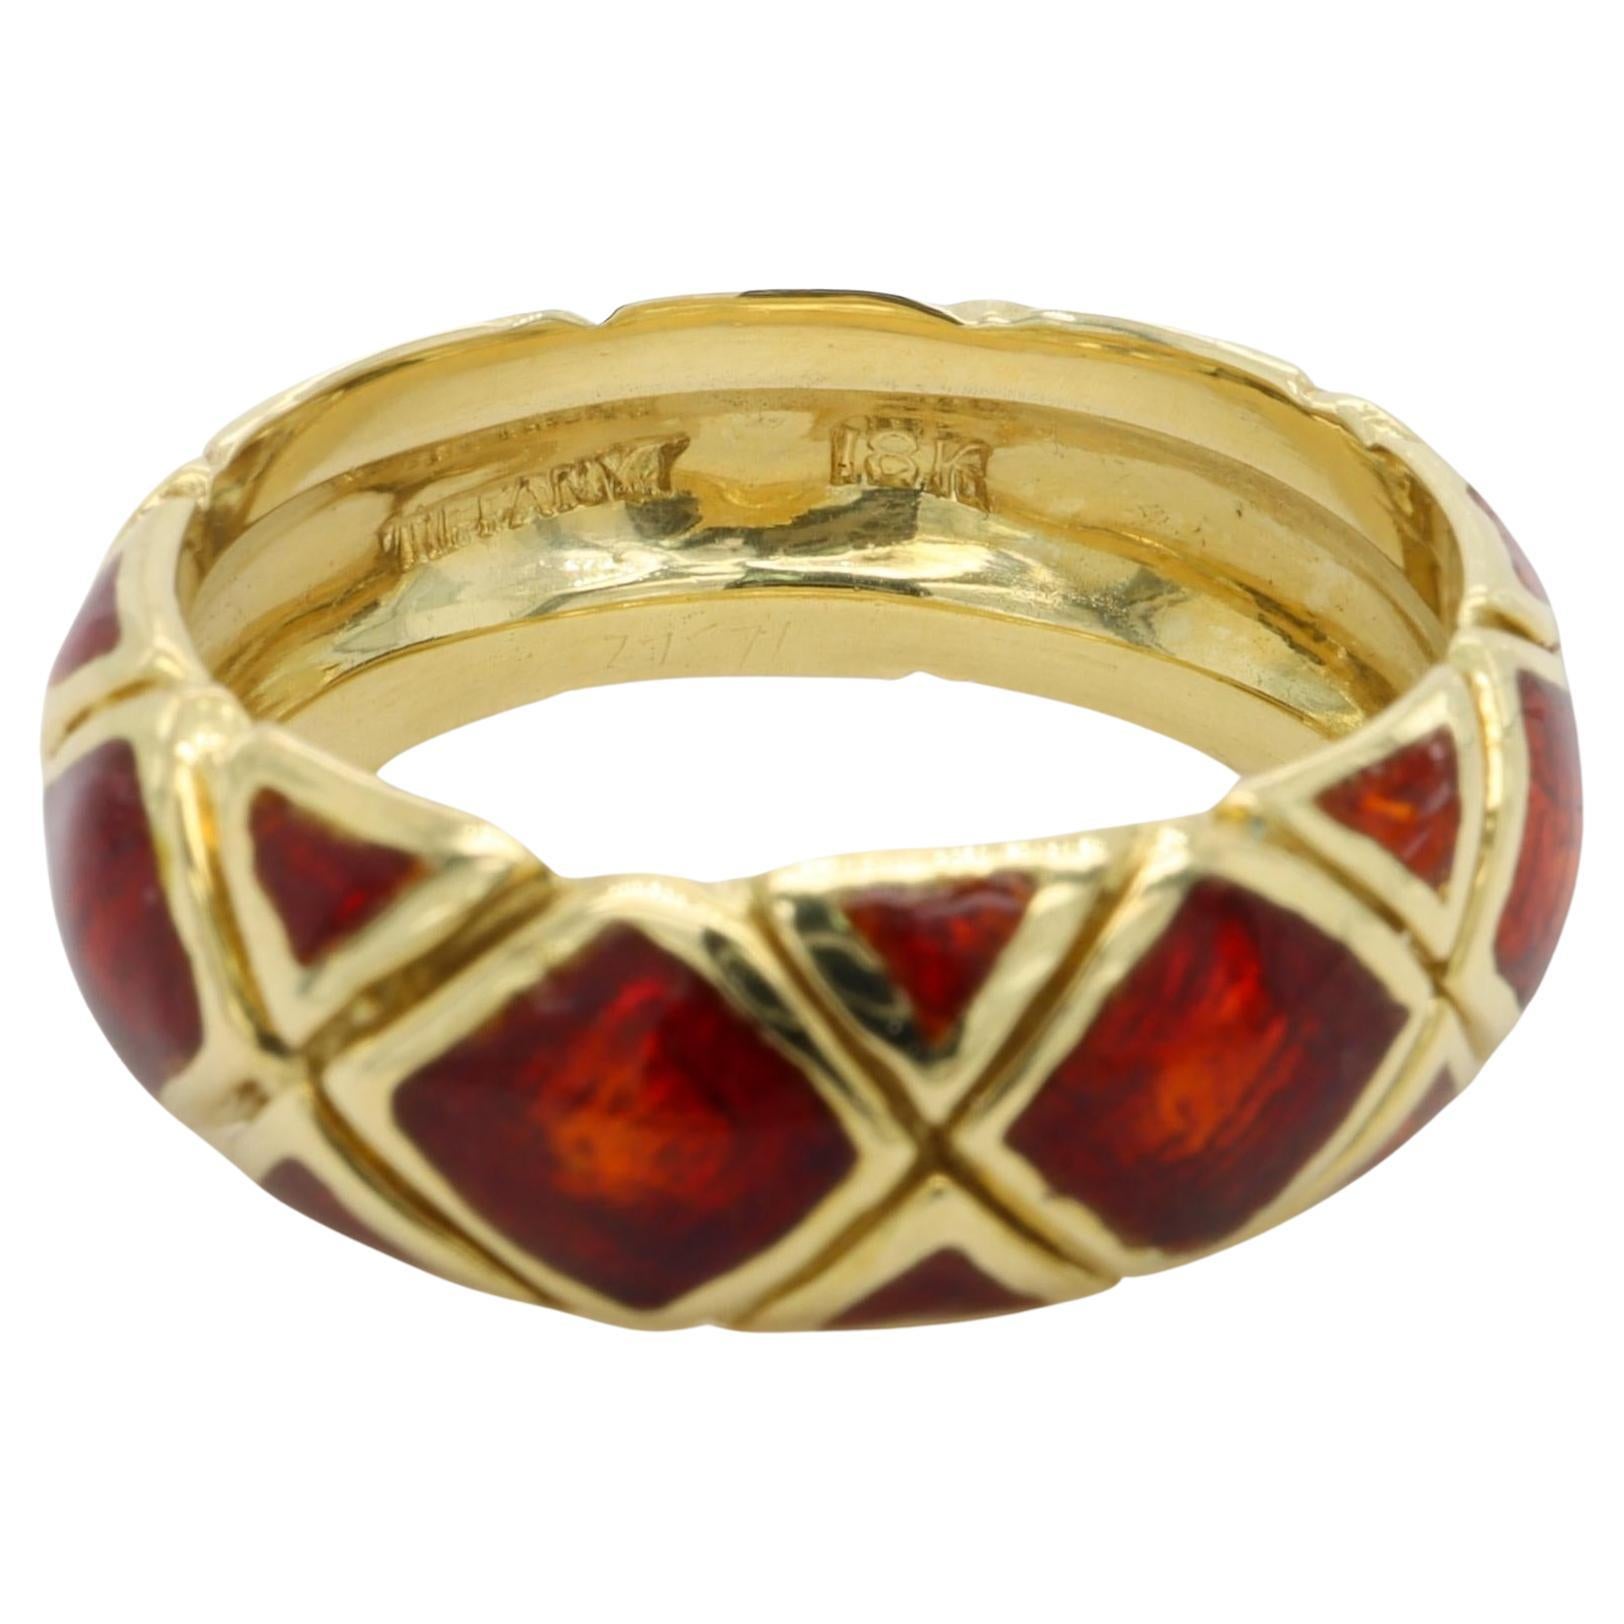 Tiffany & Co. Vintage 18K Yellow Gold and Red Enamel Band Ring, circa 1960s